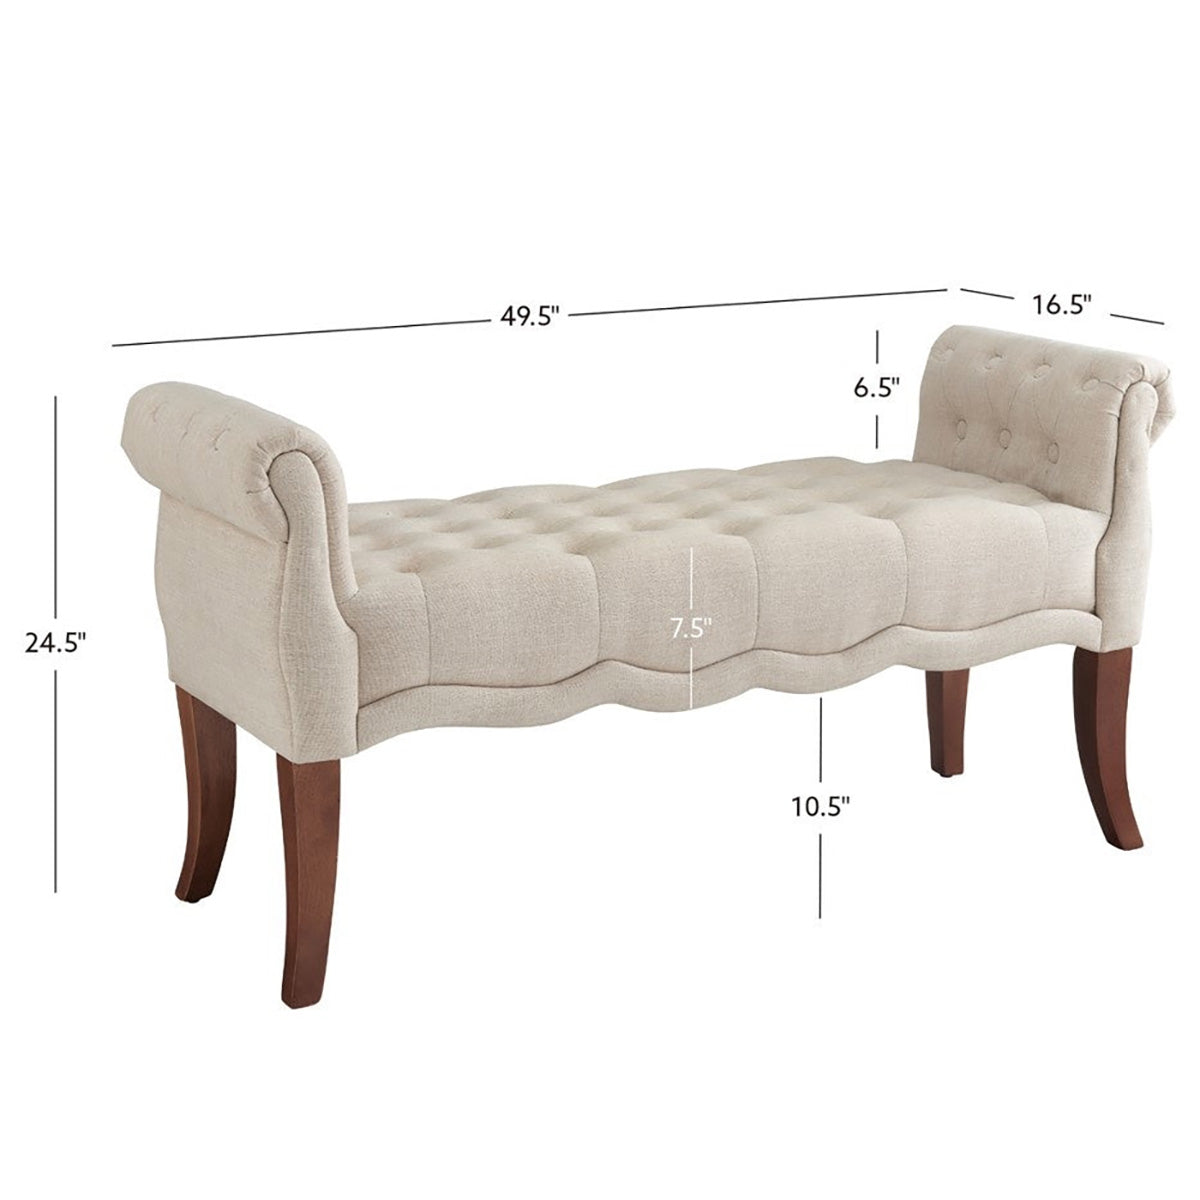 Linon Madison Upholstered Bench in Natural